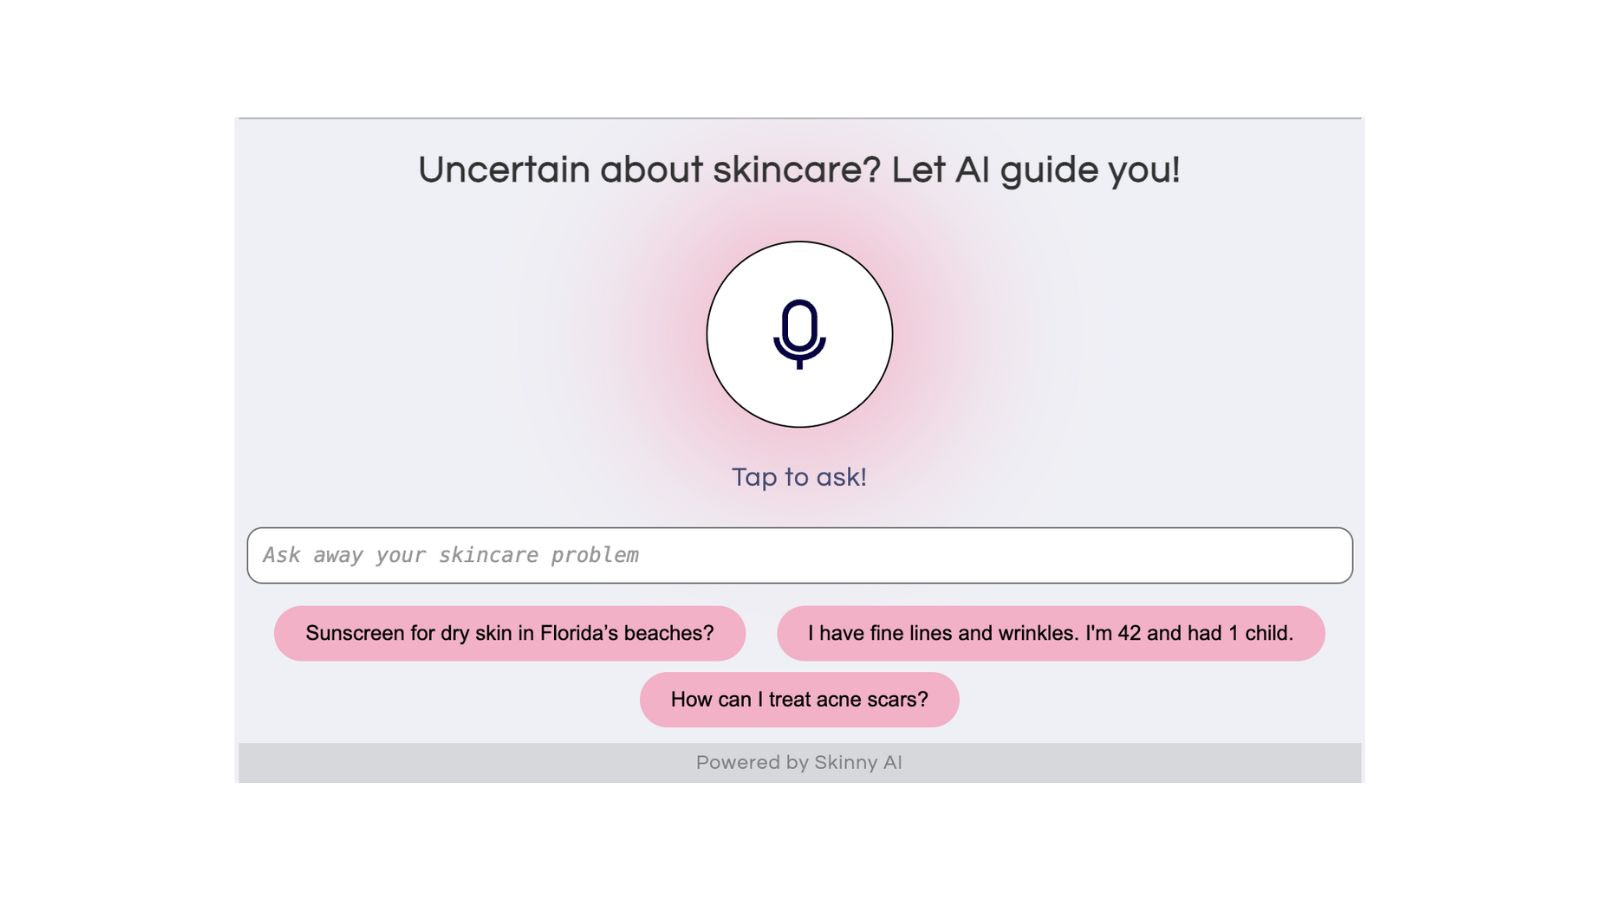 Sample question for chatbot